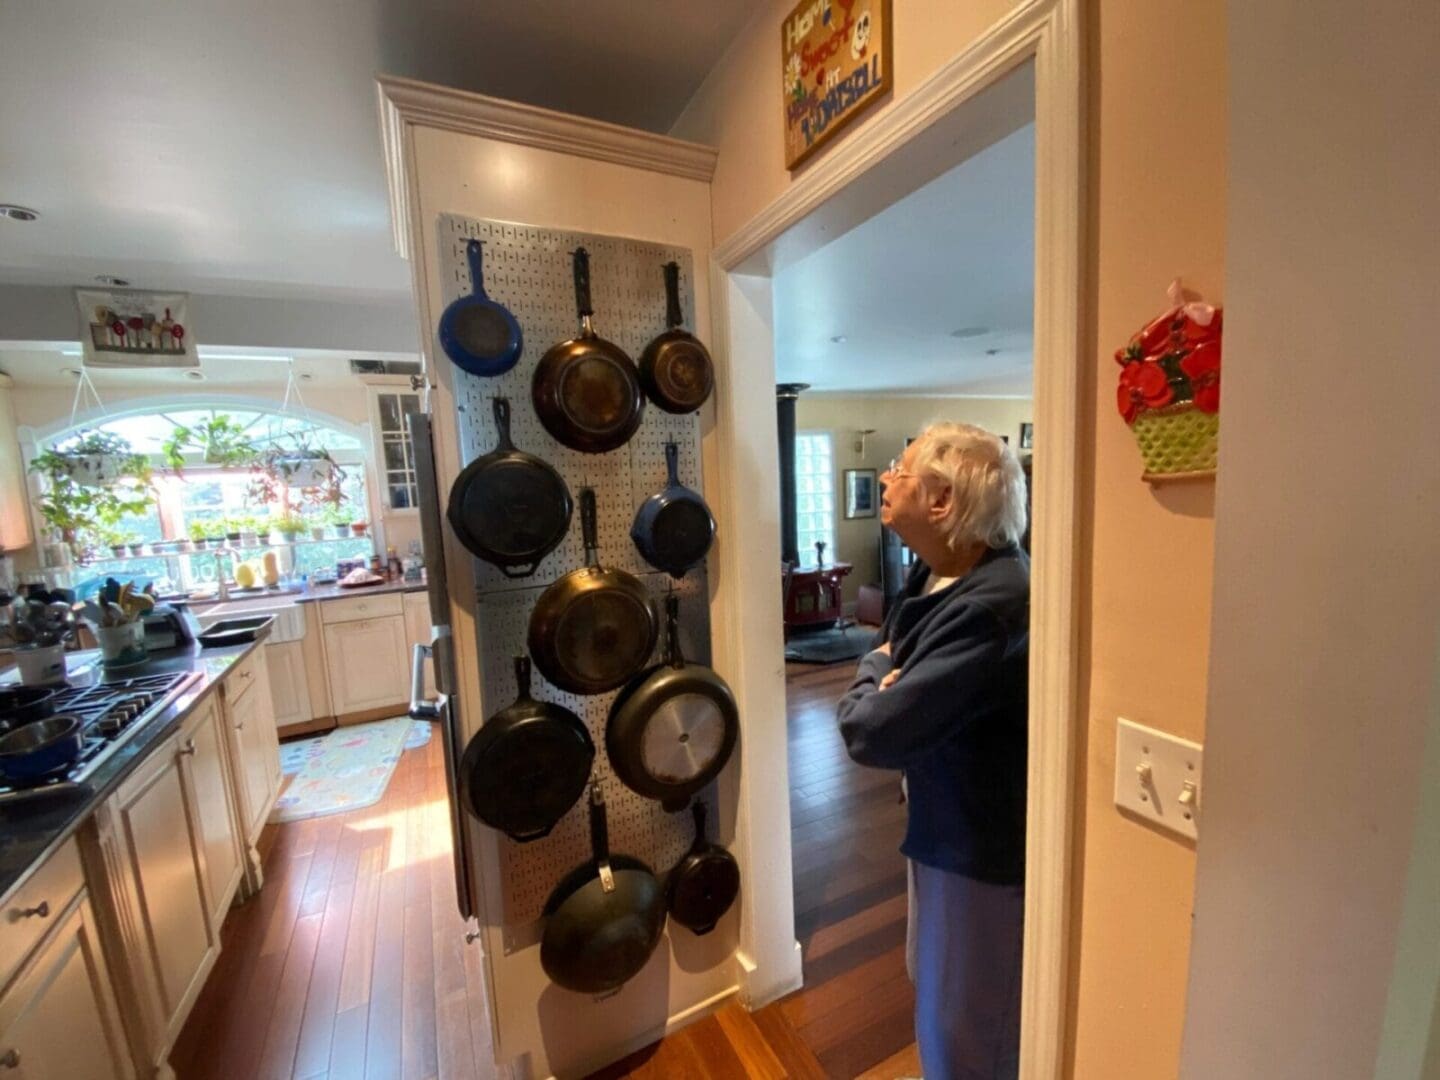 A woman looking at a kitchen with a lot of pots and pans.